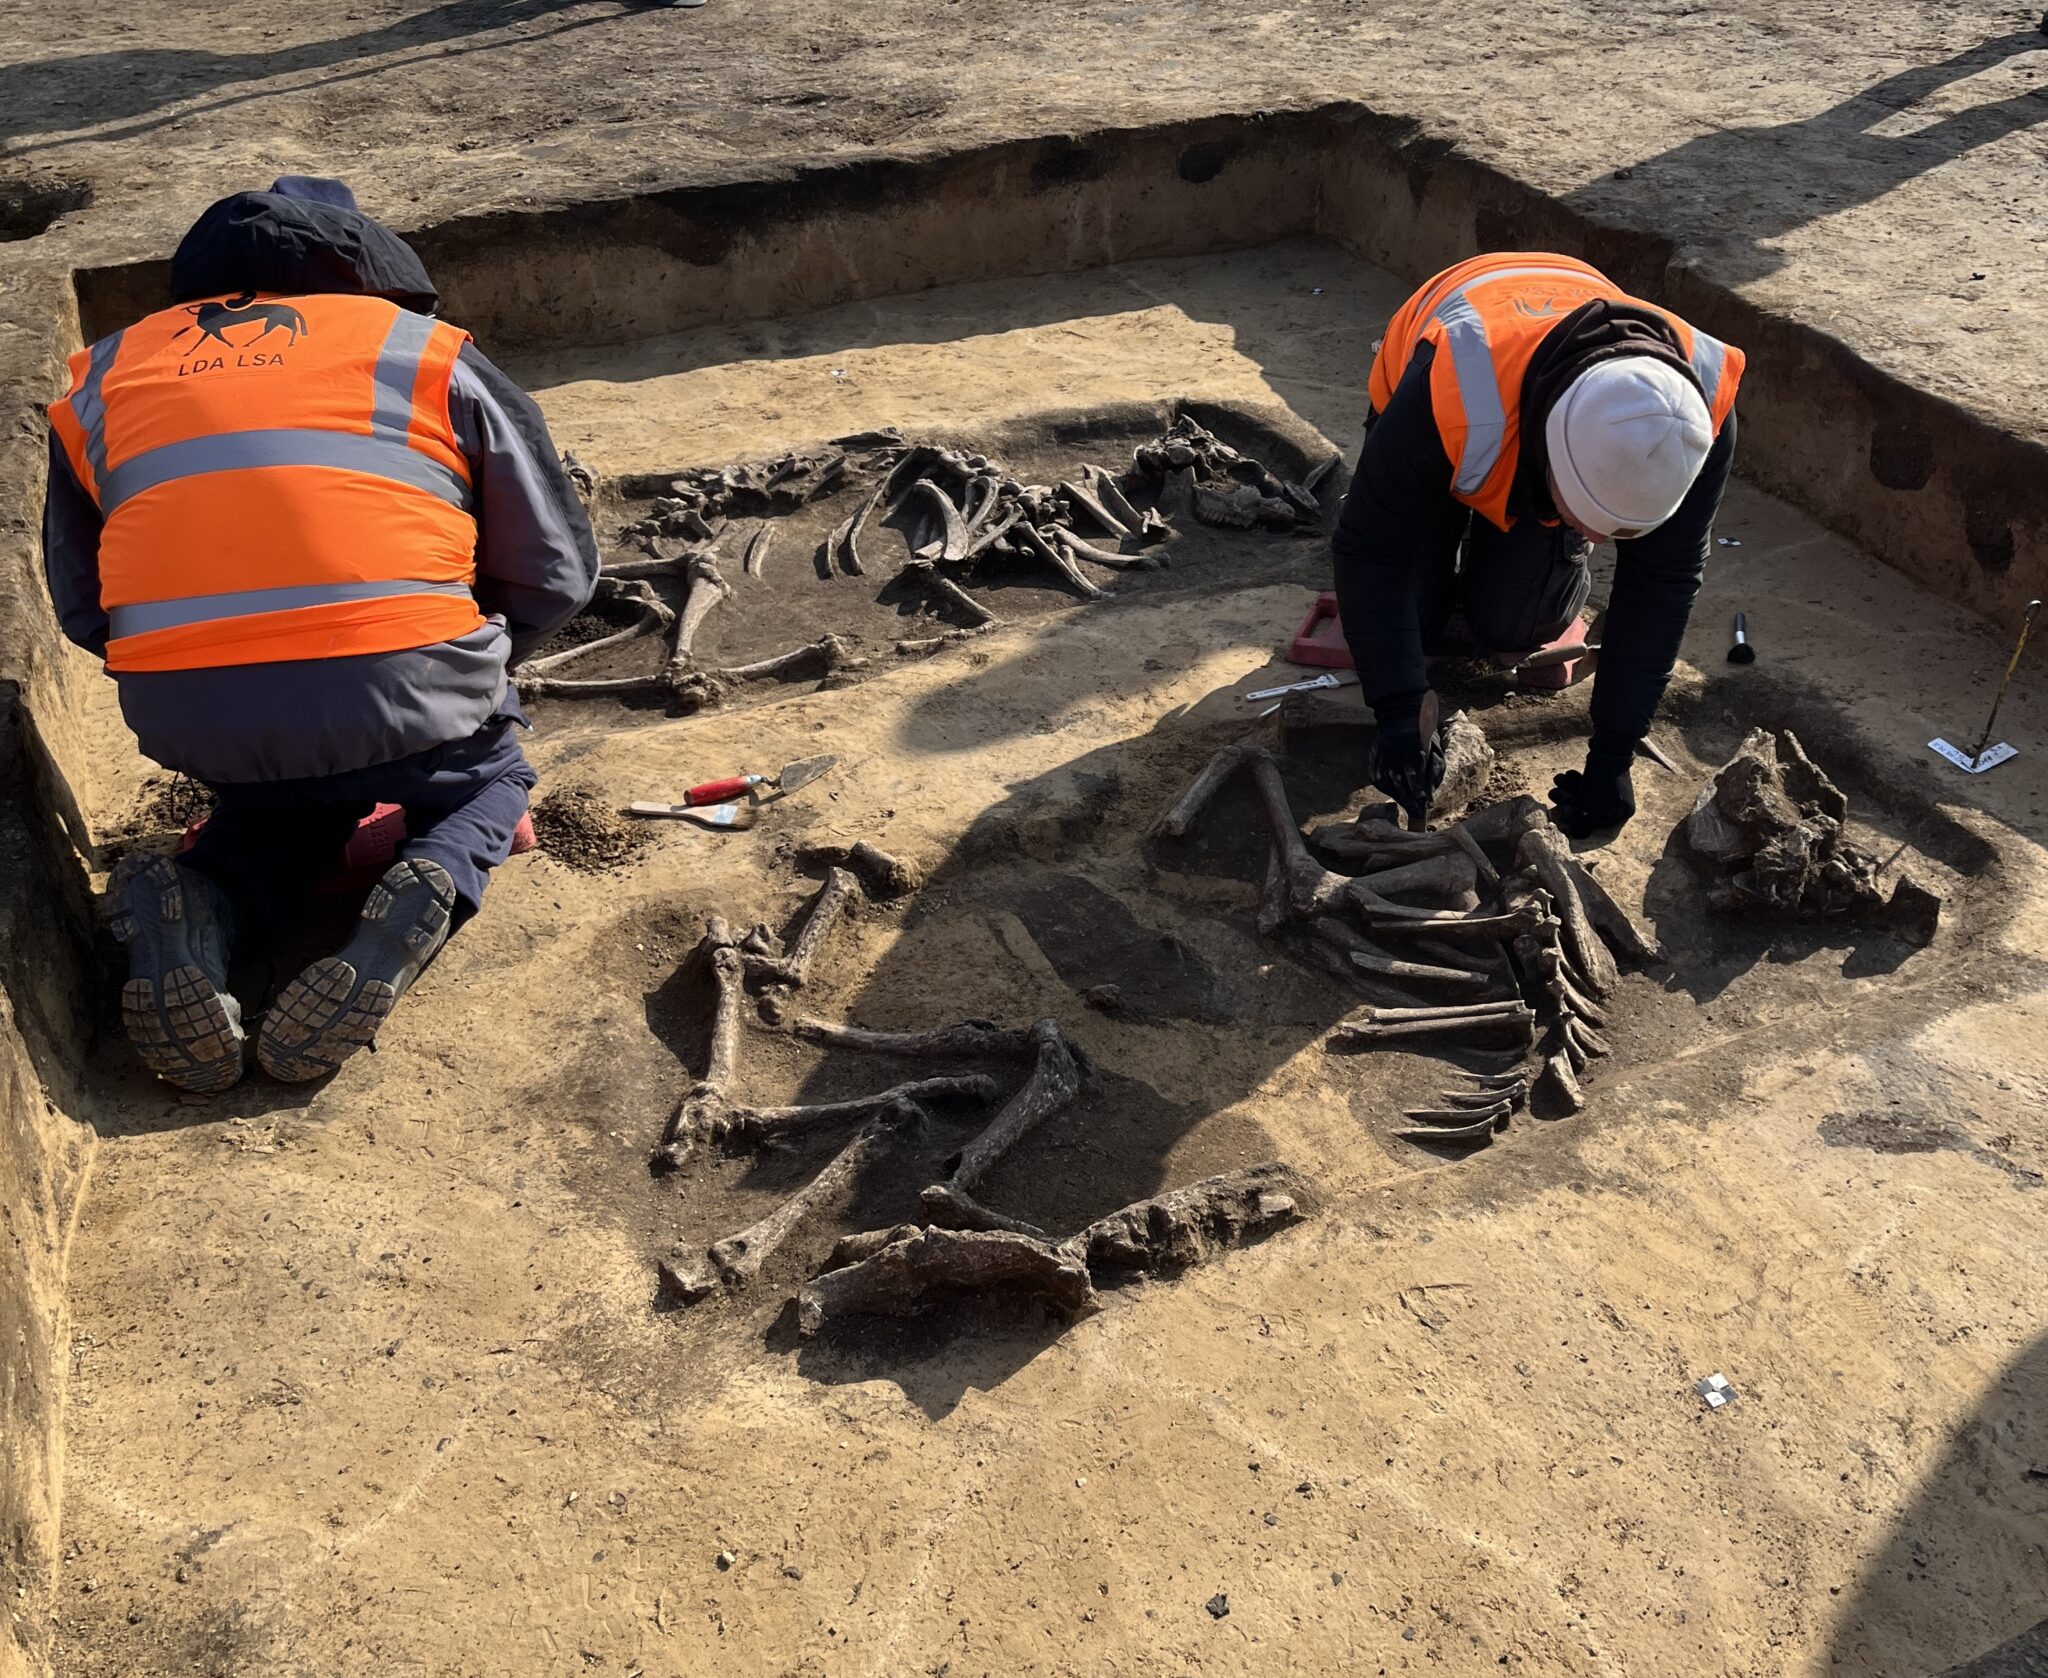 Neolithic burial mounds found in Magdeburg, Germany